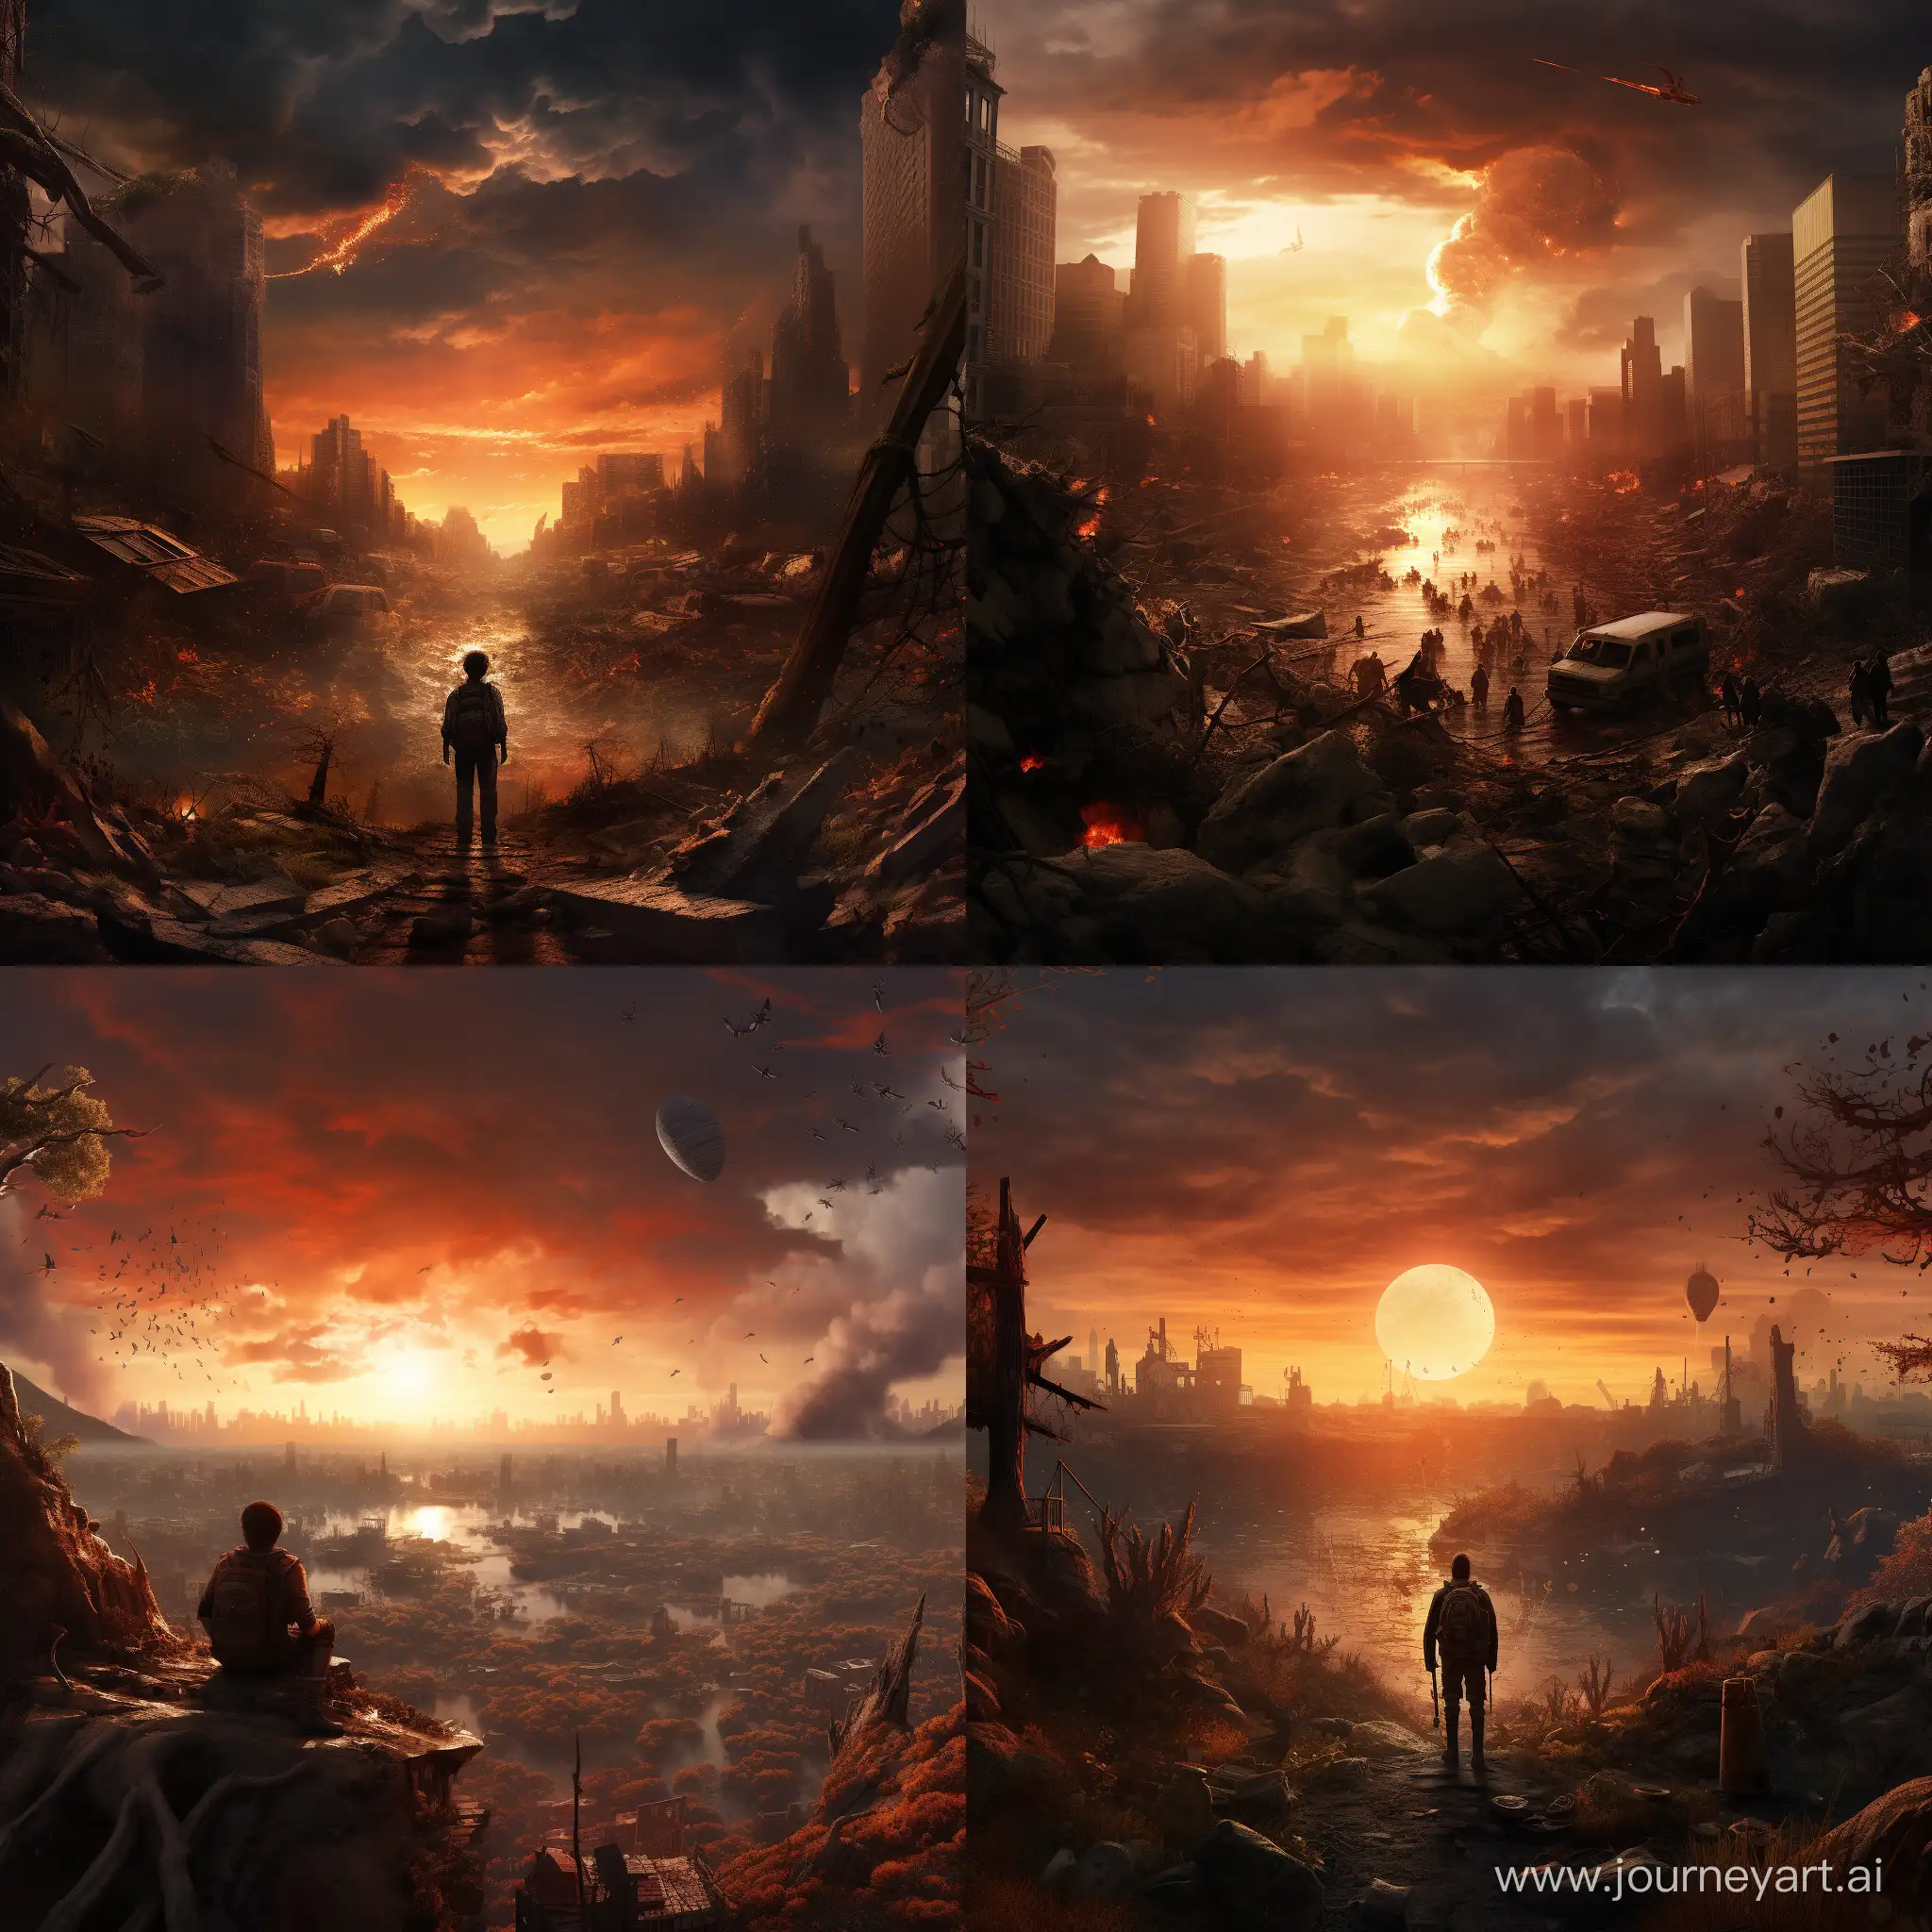 Apocalyptic-Sunset-in-11-Aspect-Ratio-No-92266